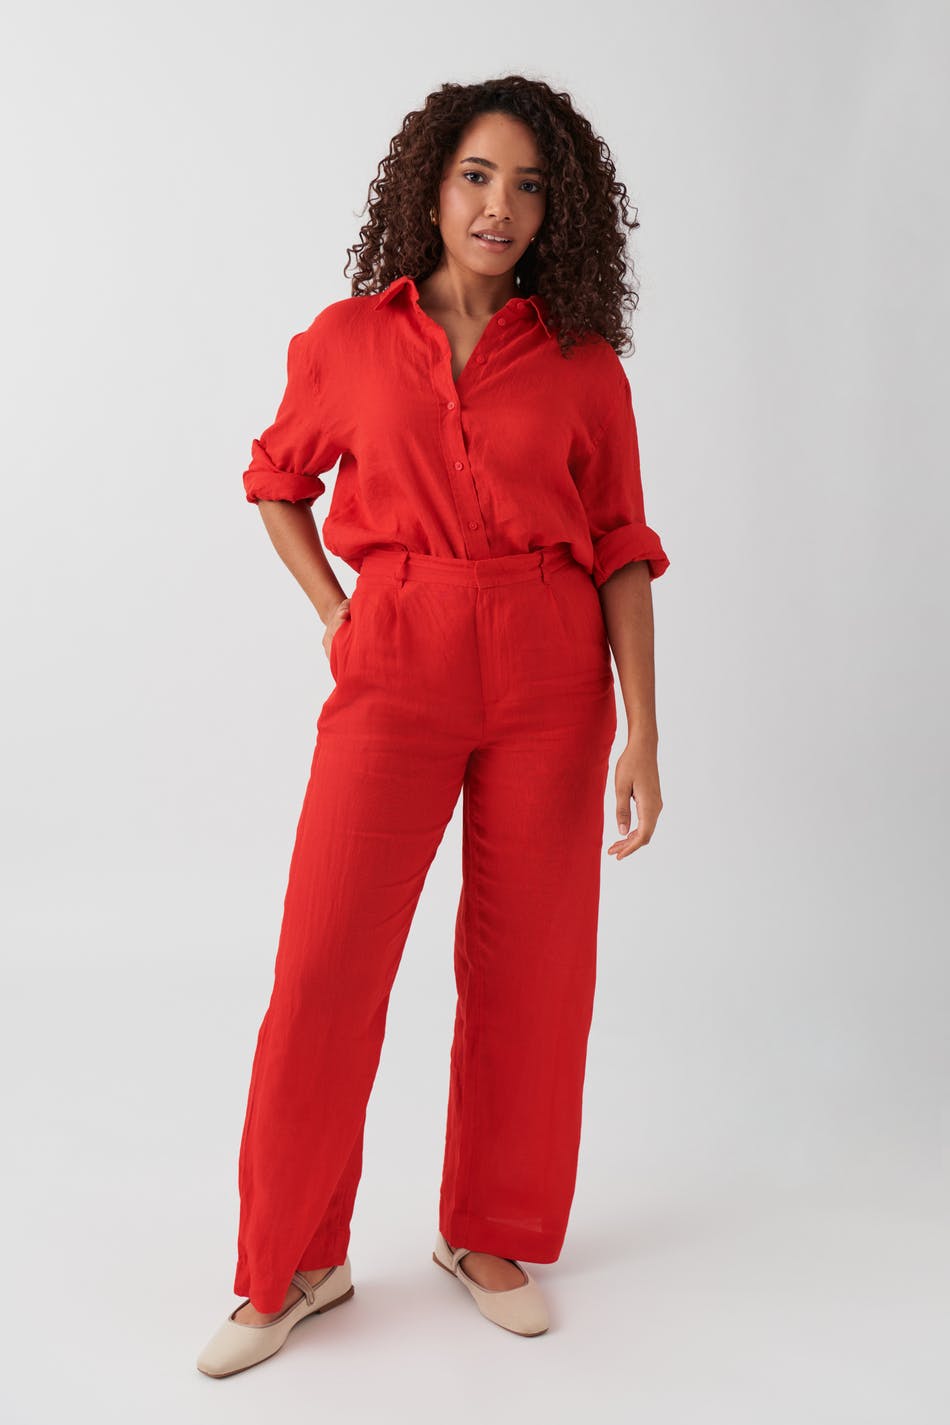 Gina Tricot - Linen trousers - linnebyxor - Red - XL - Female